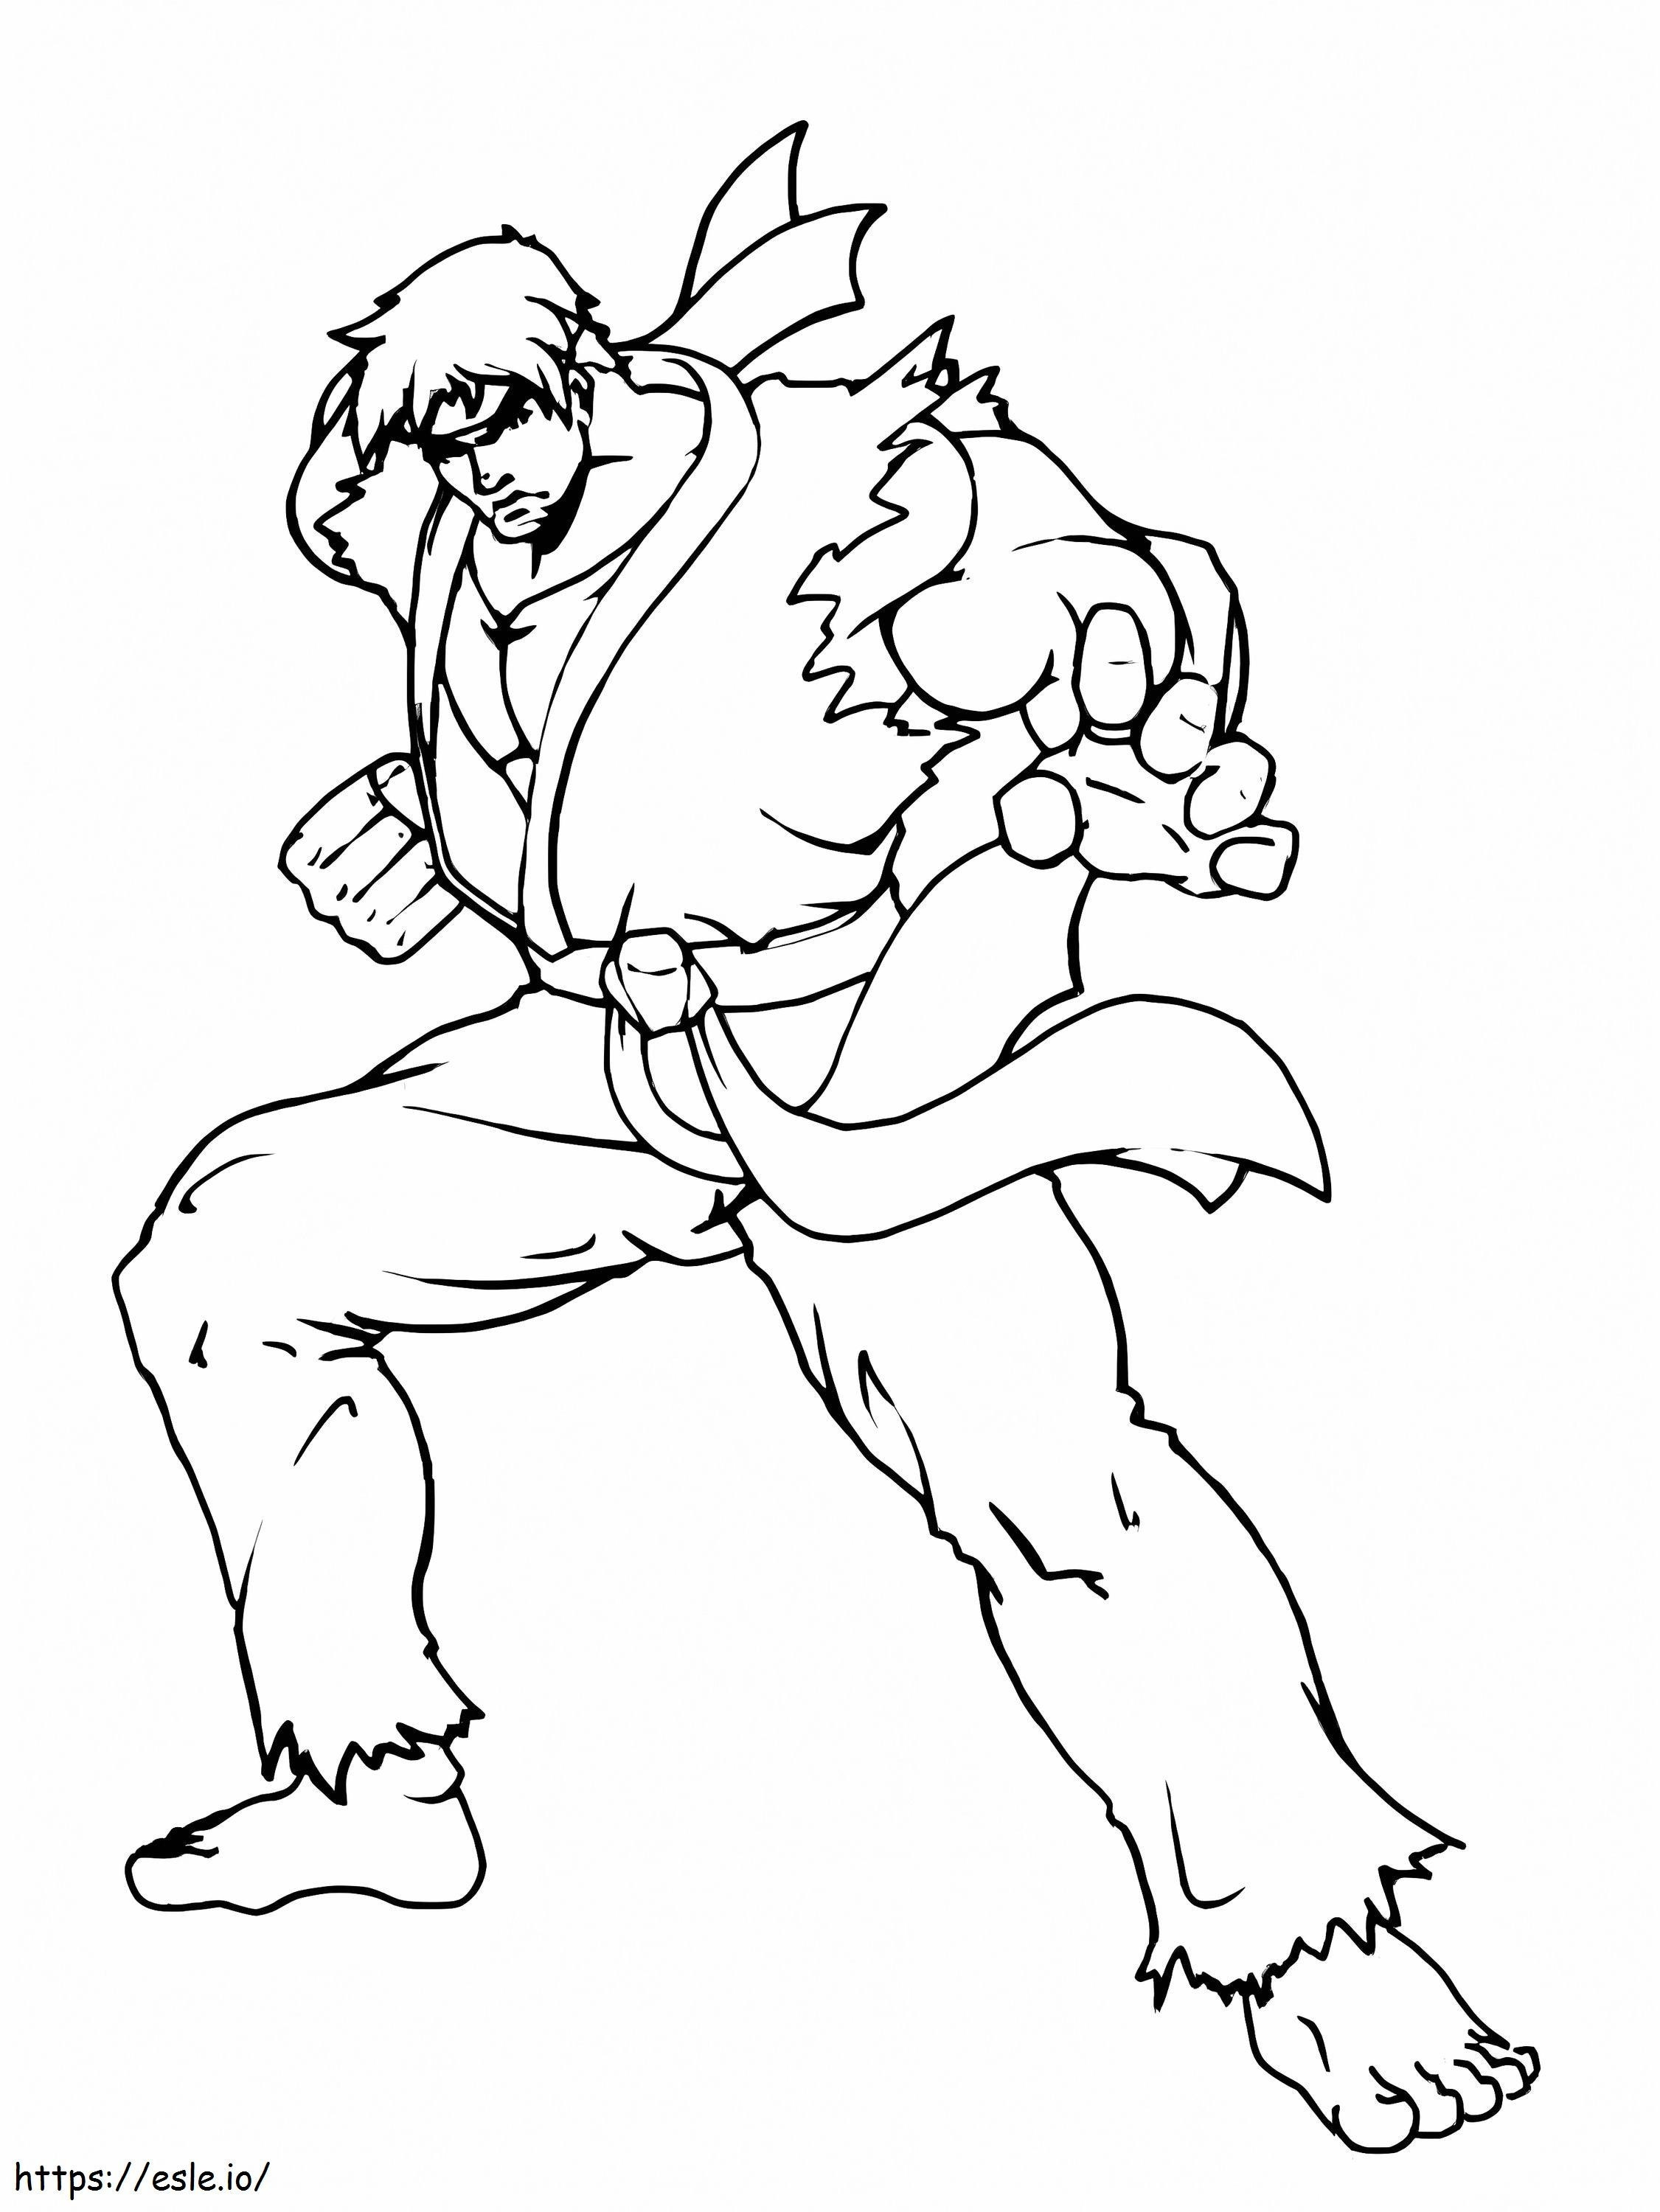 Great Ryu Fight coloring page